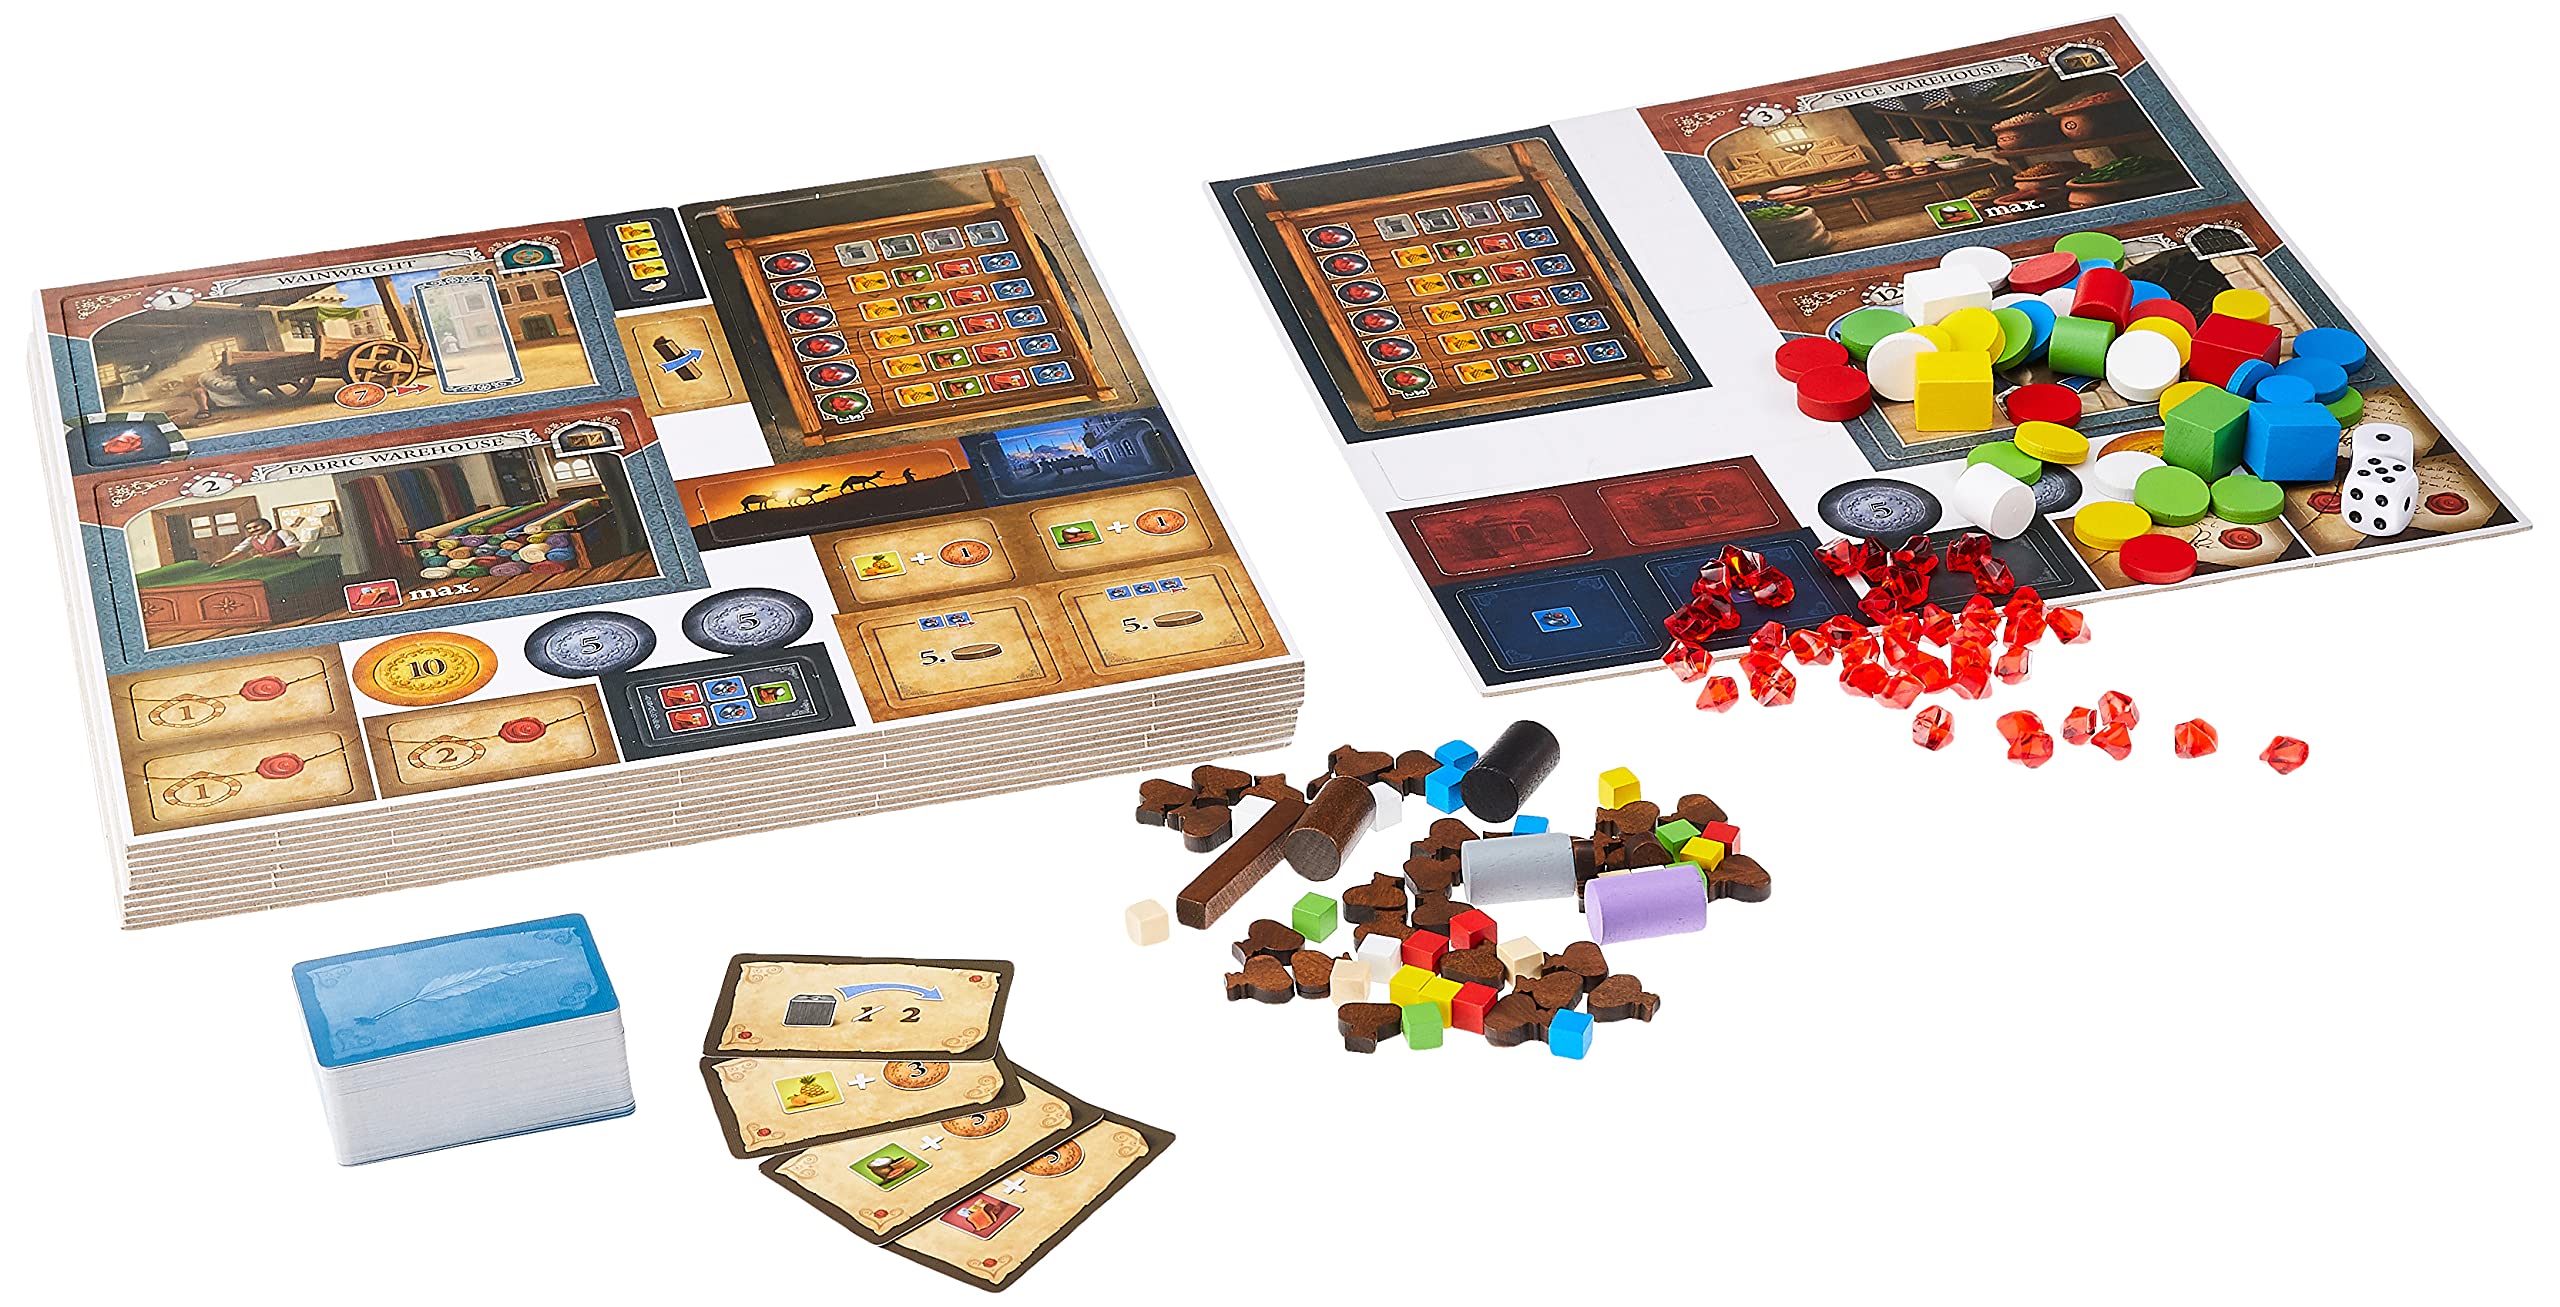 Alderac Entertainment Group (AEG) Istanbul Big Box - Board Game, Collect Gems, Be a Master Merchant, 2 to 5 Players, 40 to 60 Minute Play Time, for Ages 10 and Up, Alderac Entertainment Group (AEG)